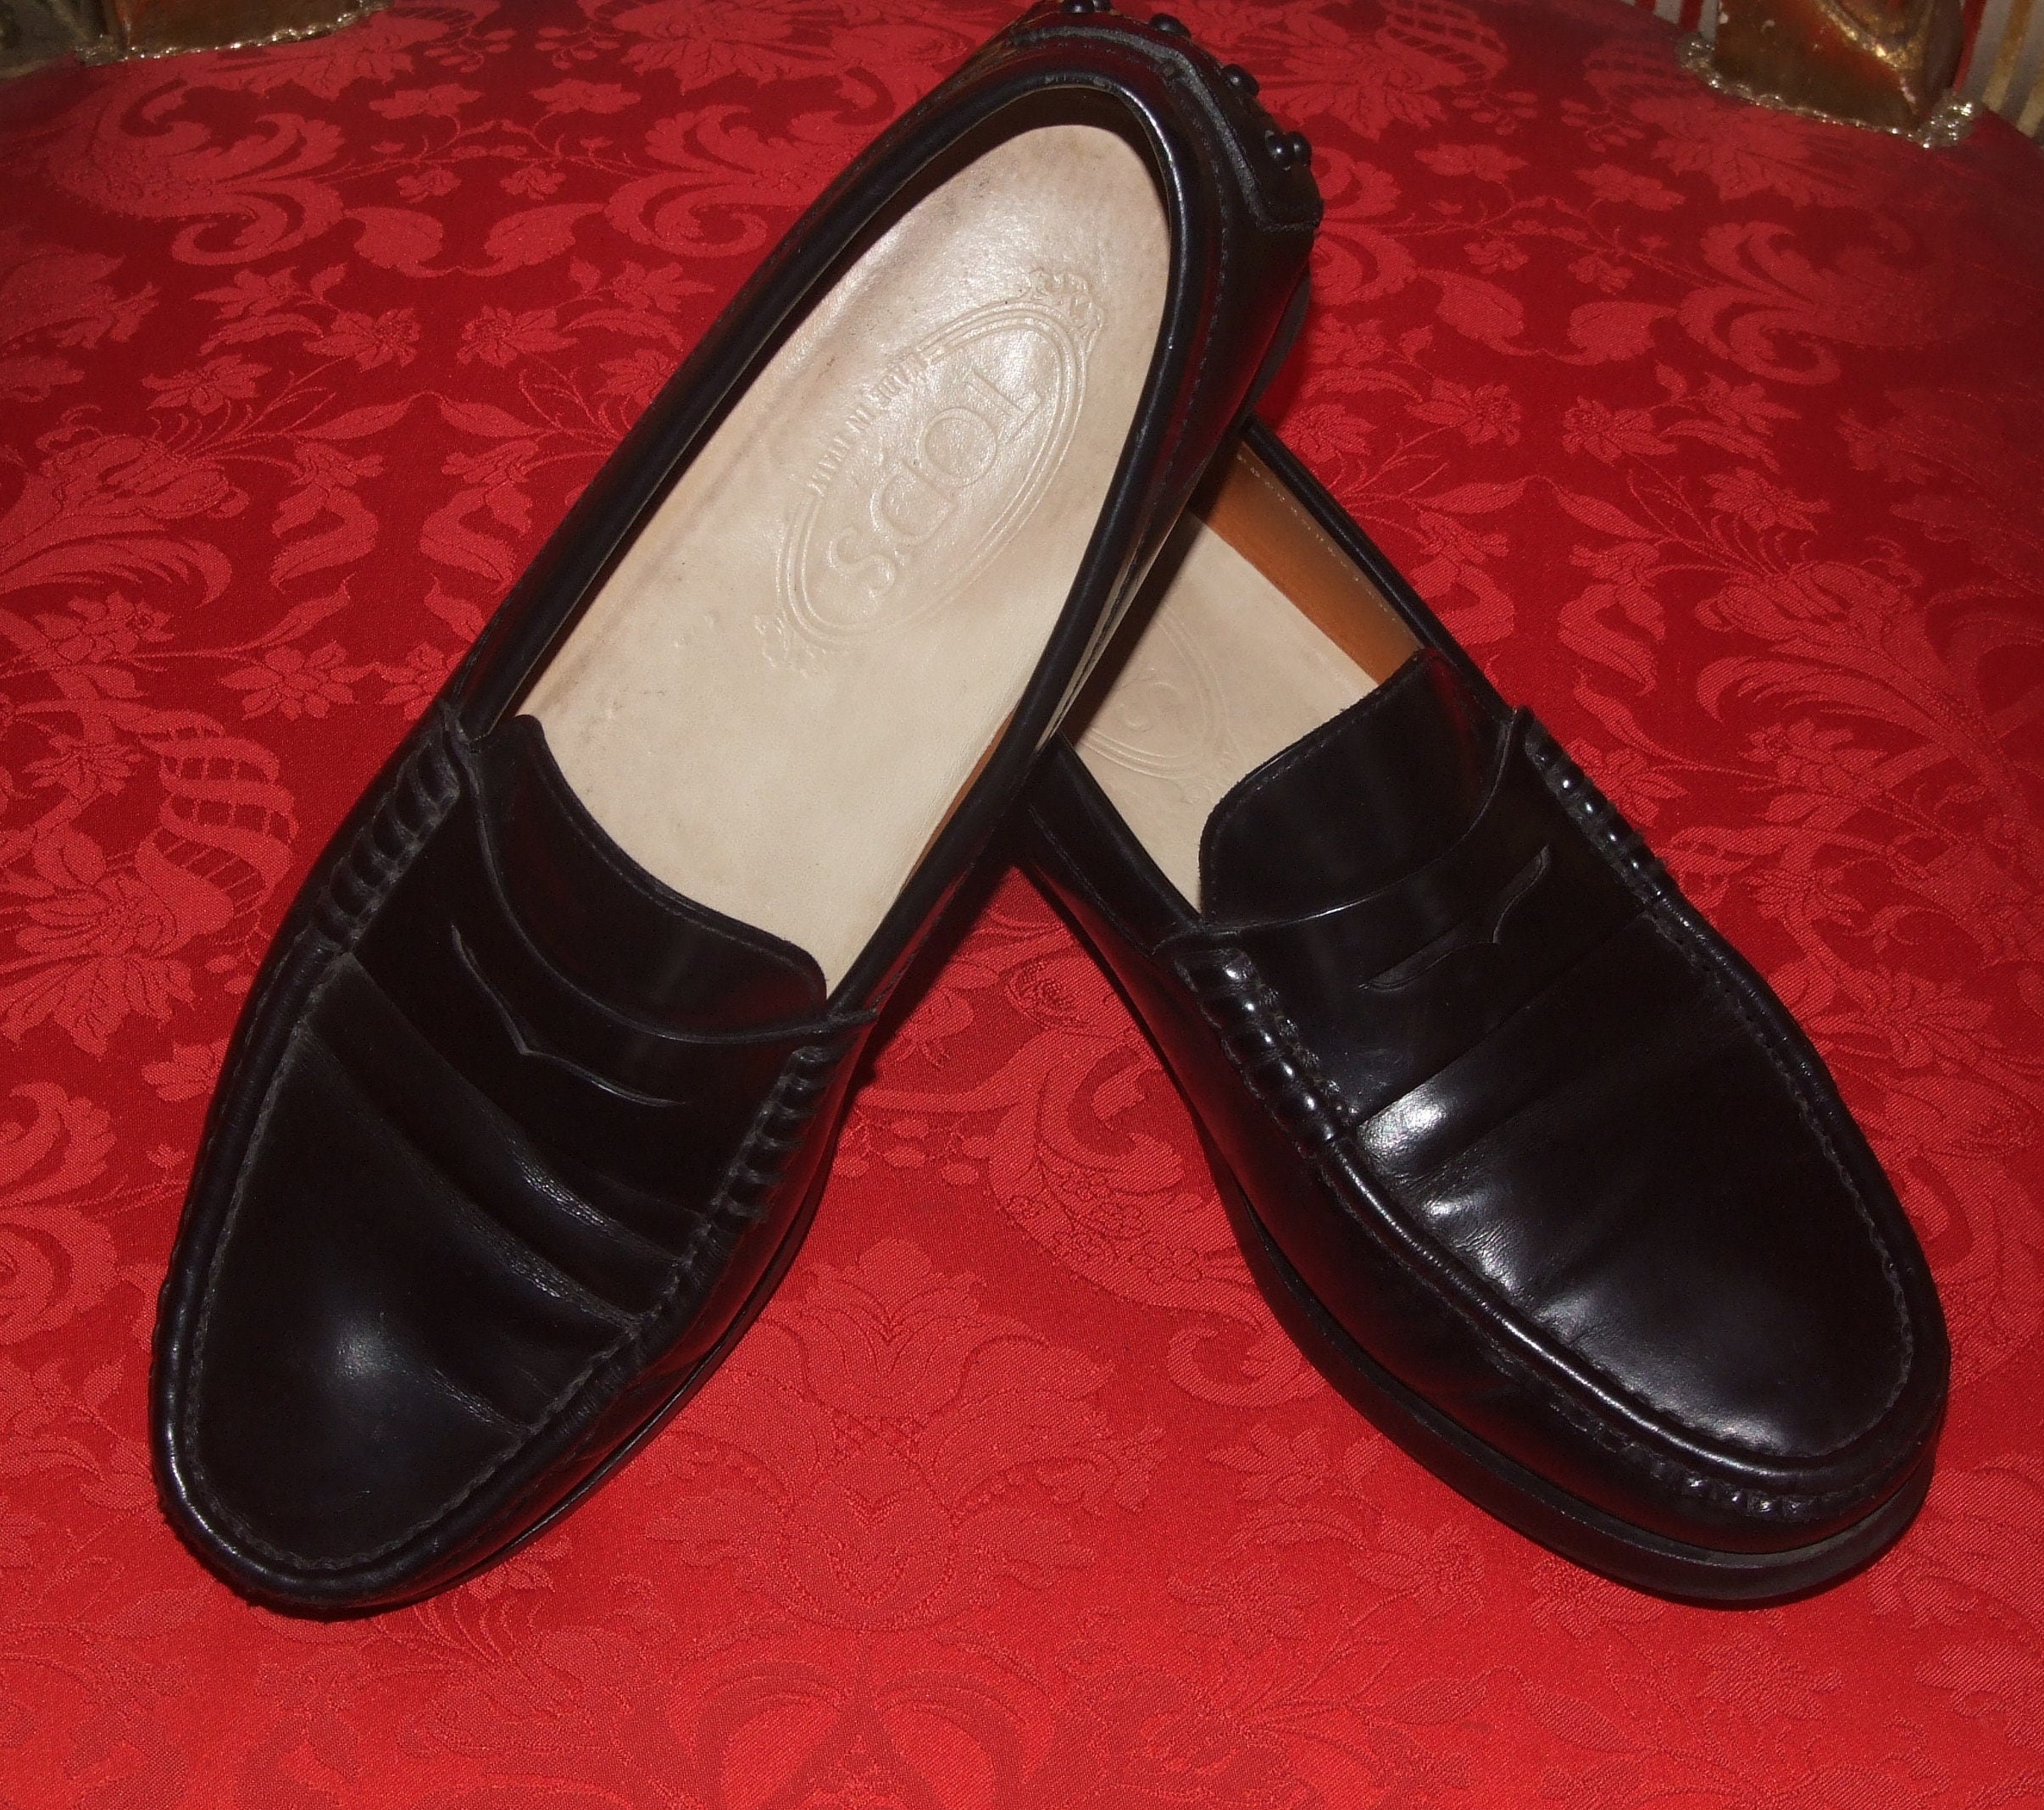 Tods Shoes - Etsy